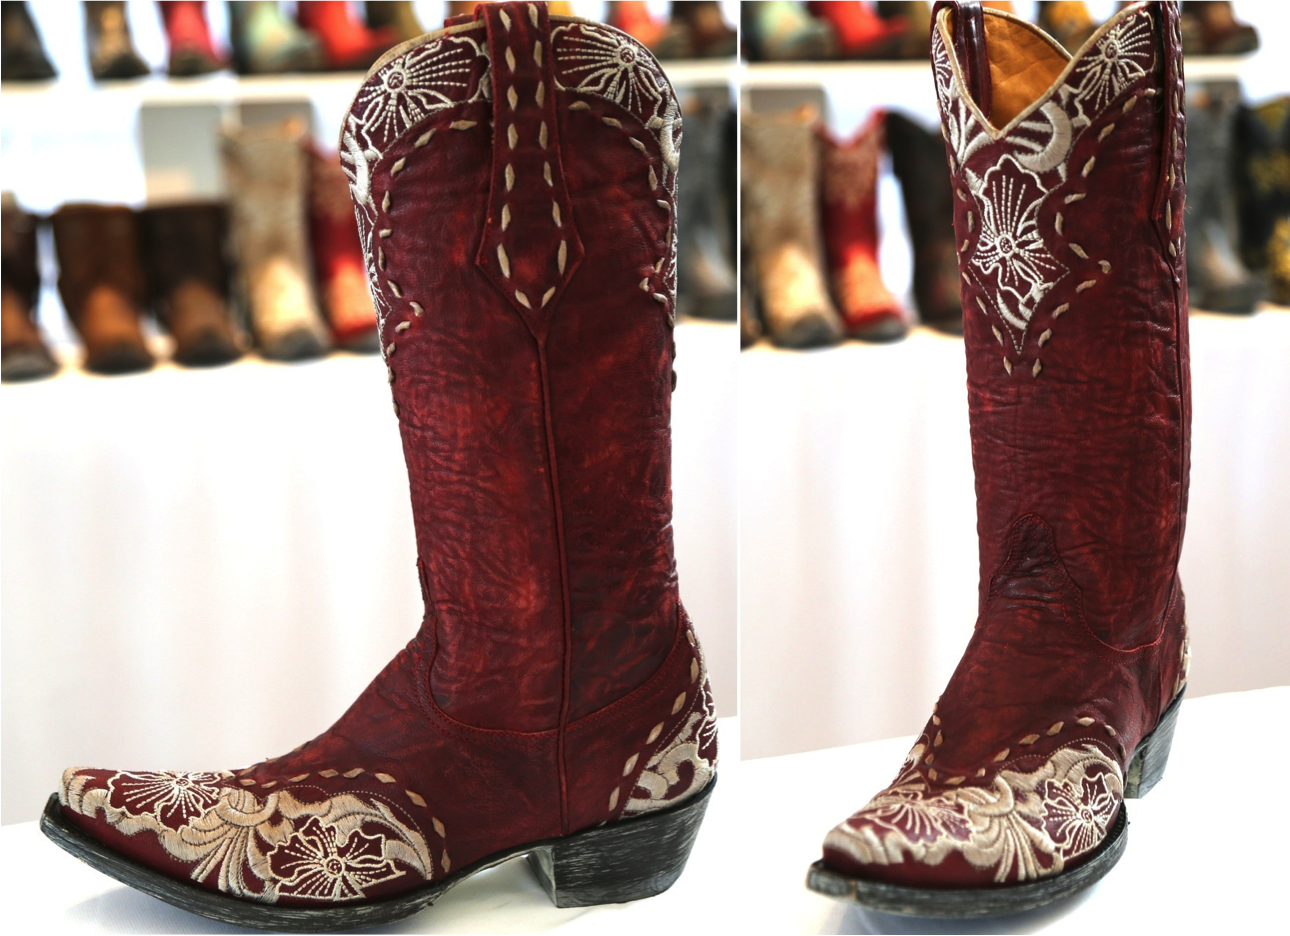 New Old Gringo Boot Styles | Latest From Old Gringo - Rivertrail